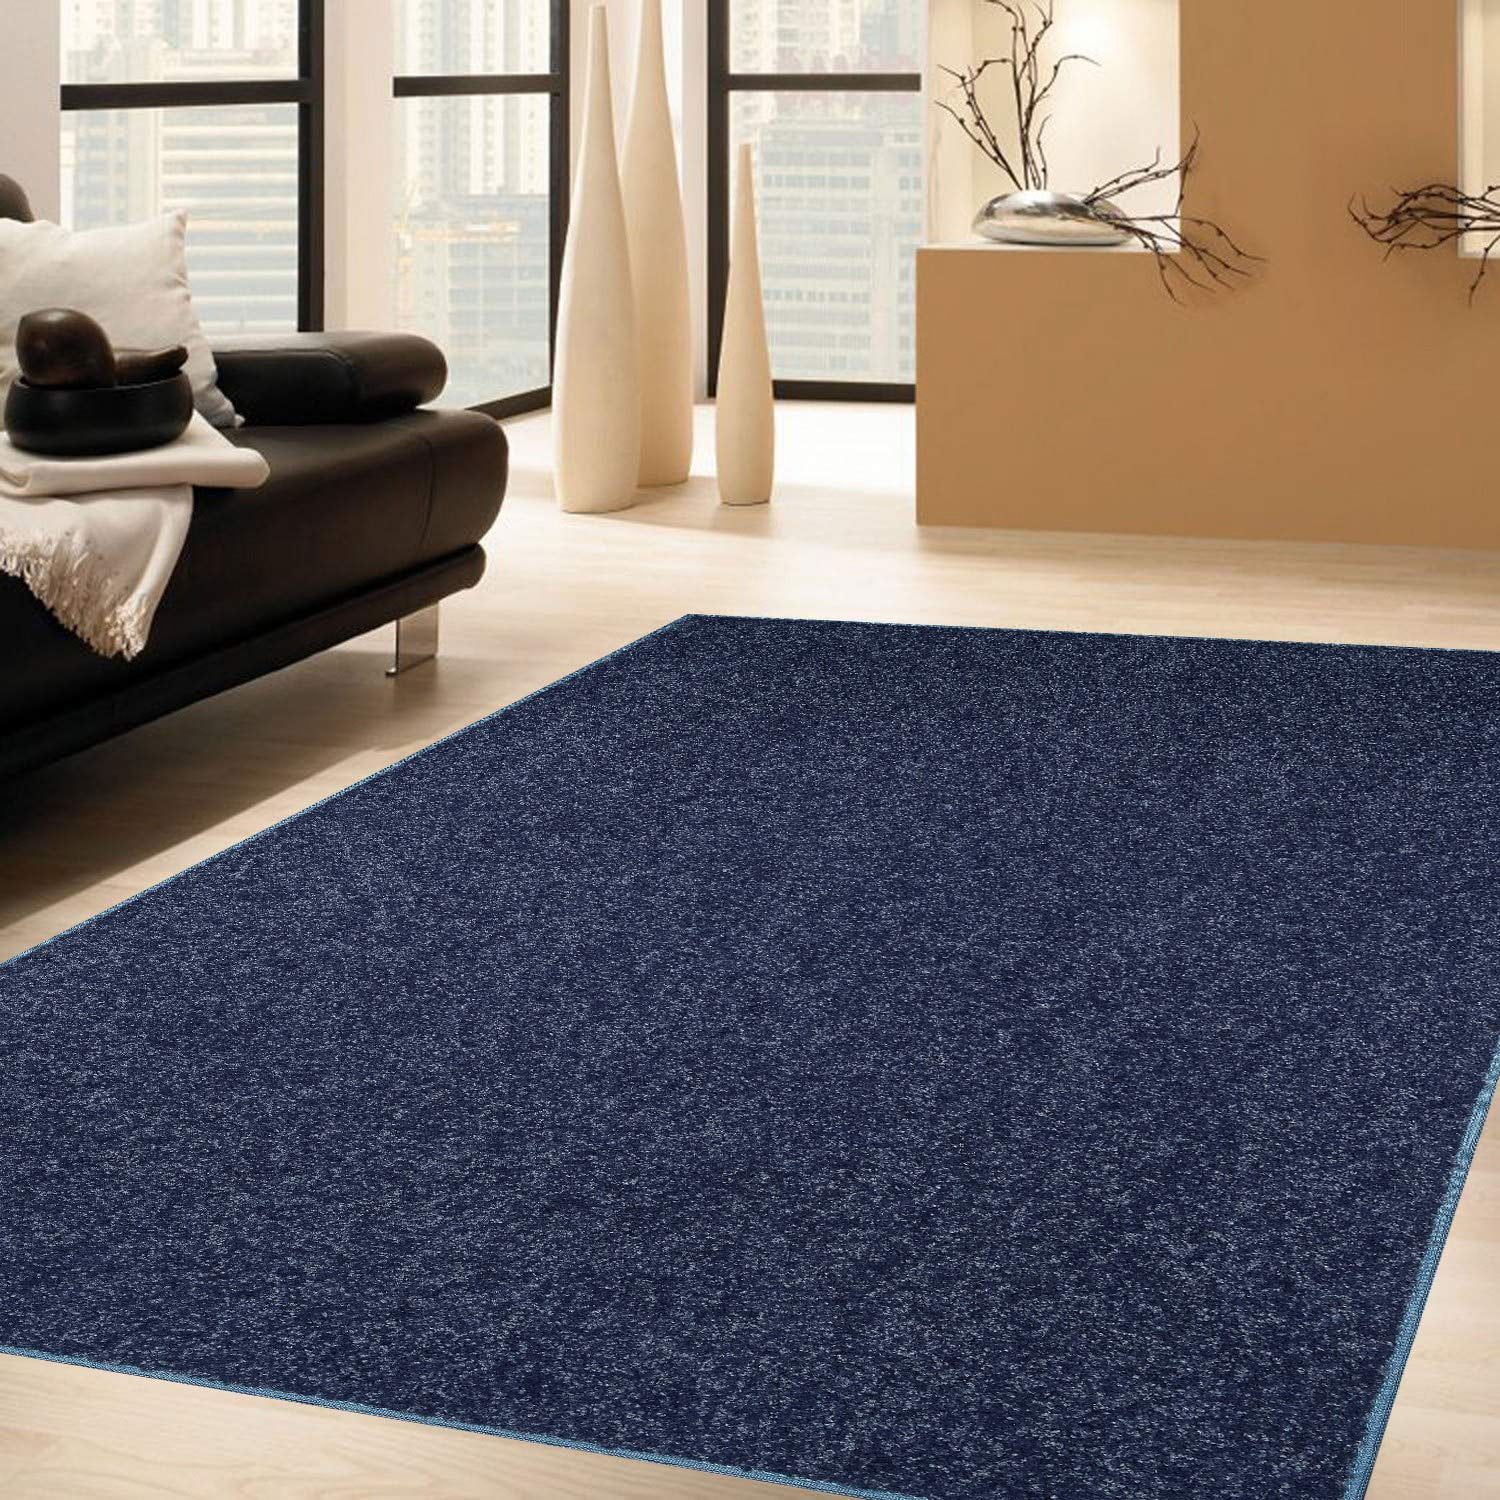 Thick Hall Runner Heat Set KIWI rectangles Width 80-120cm extra long Soft RUGS 